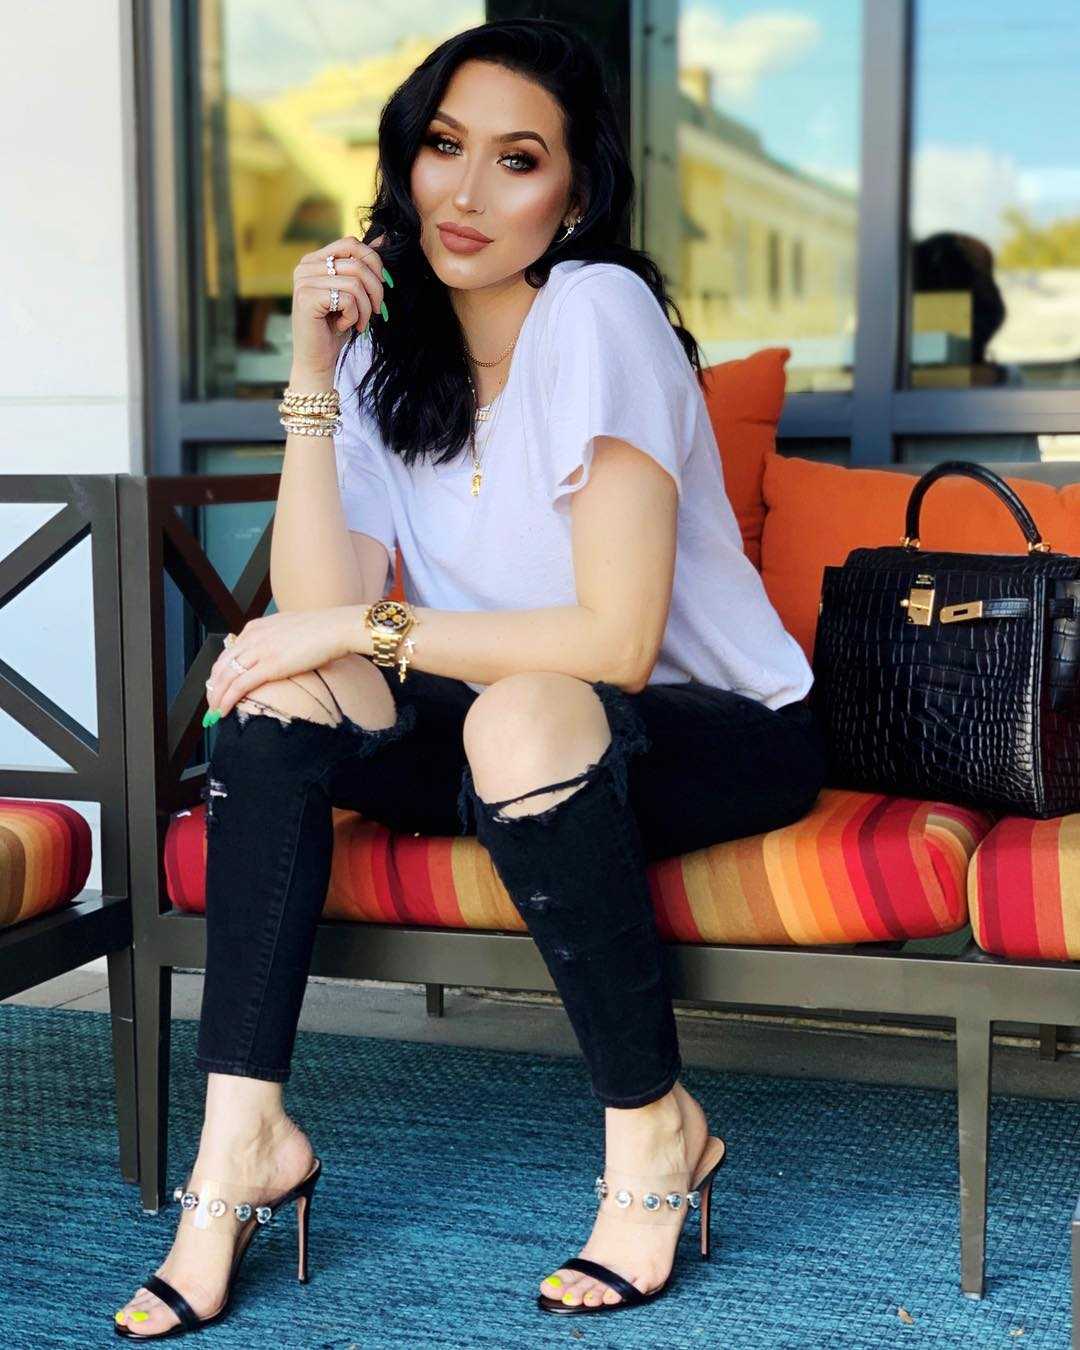 51 Sexy Jaclyn Hill Boobs Pictures Will Induce Passionate Feelings for Her 170